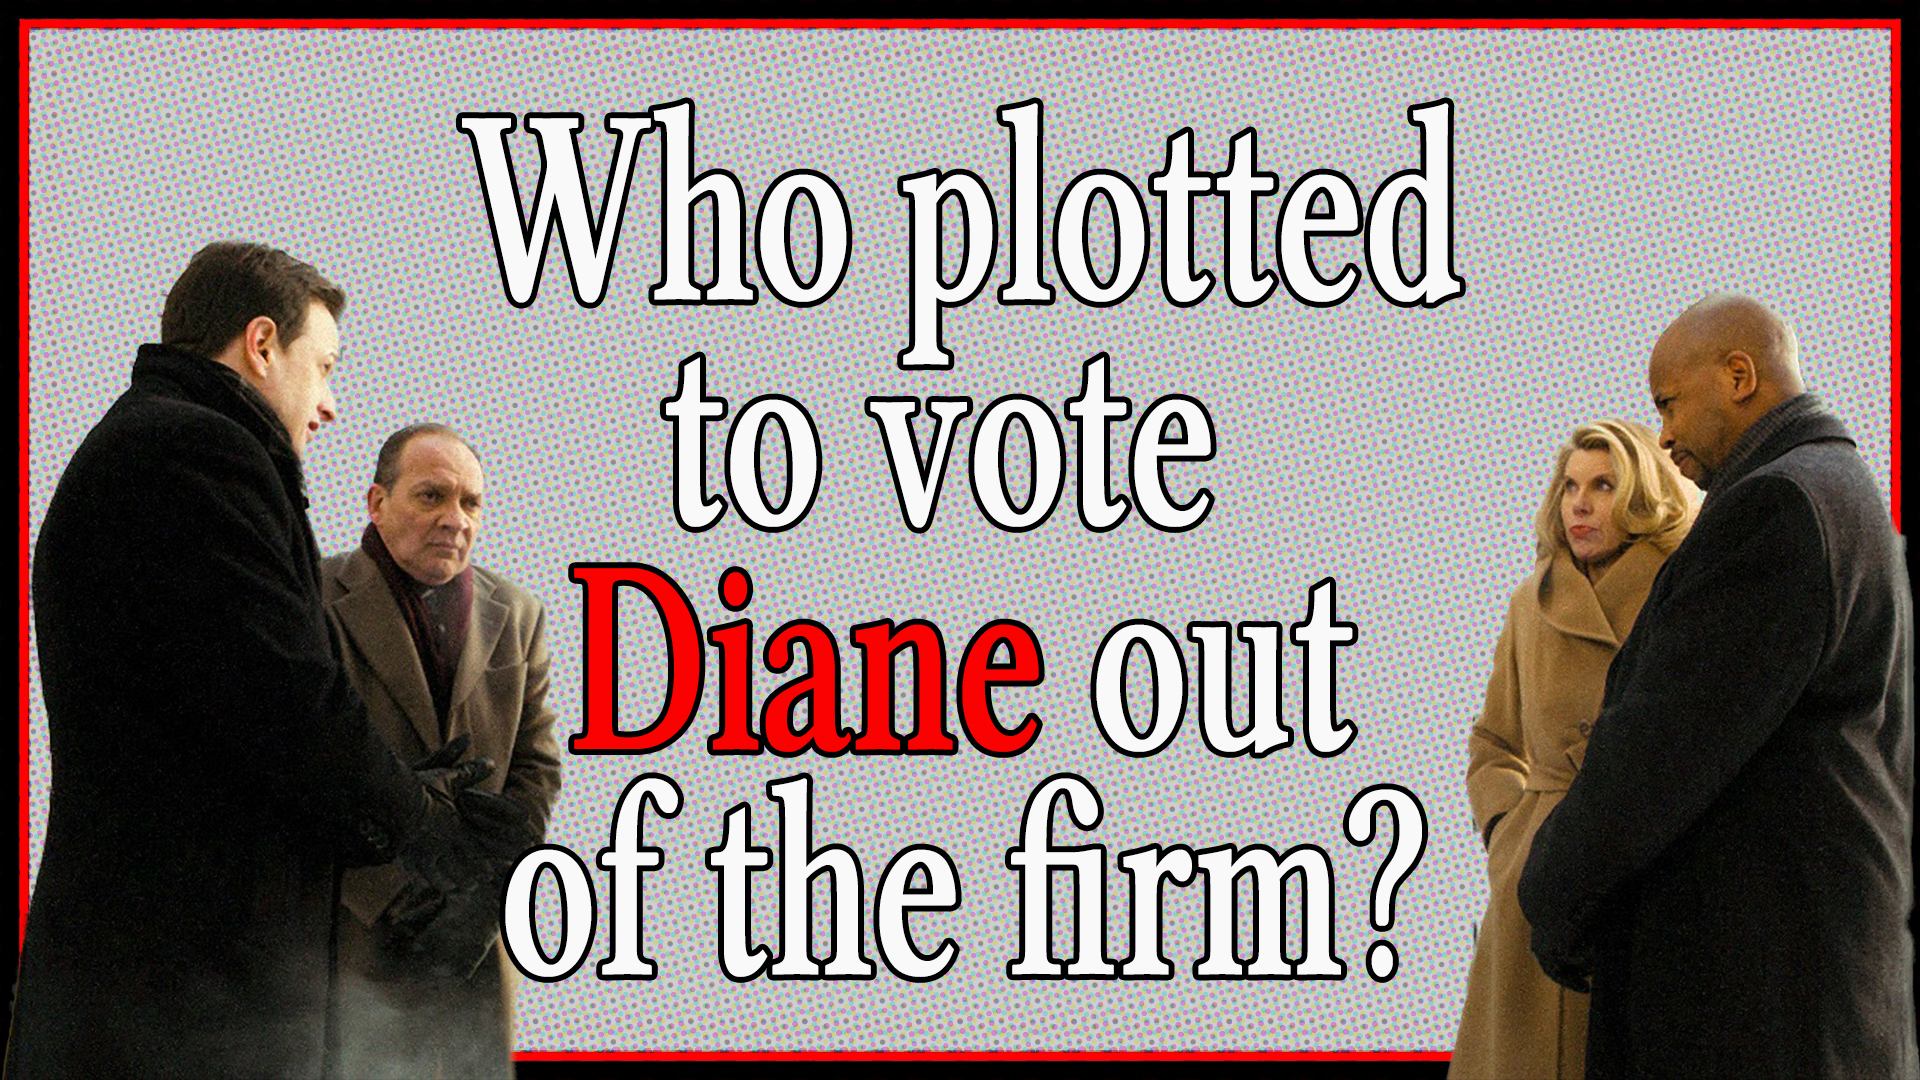 Who plotted to vote Diane out of the firm?